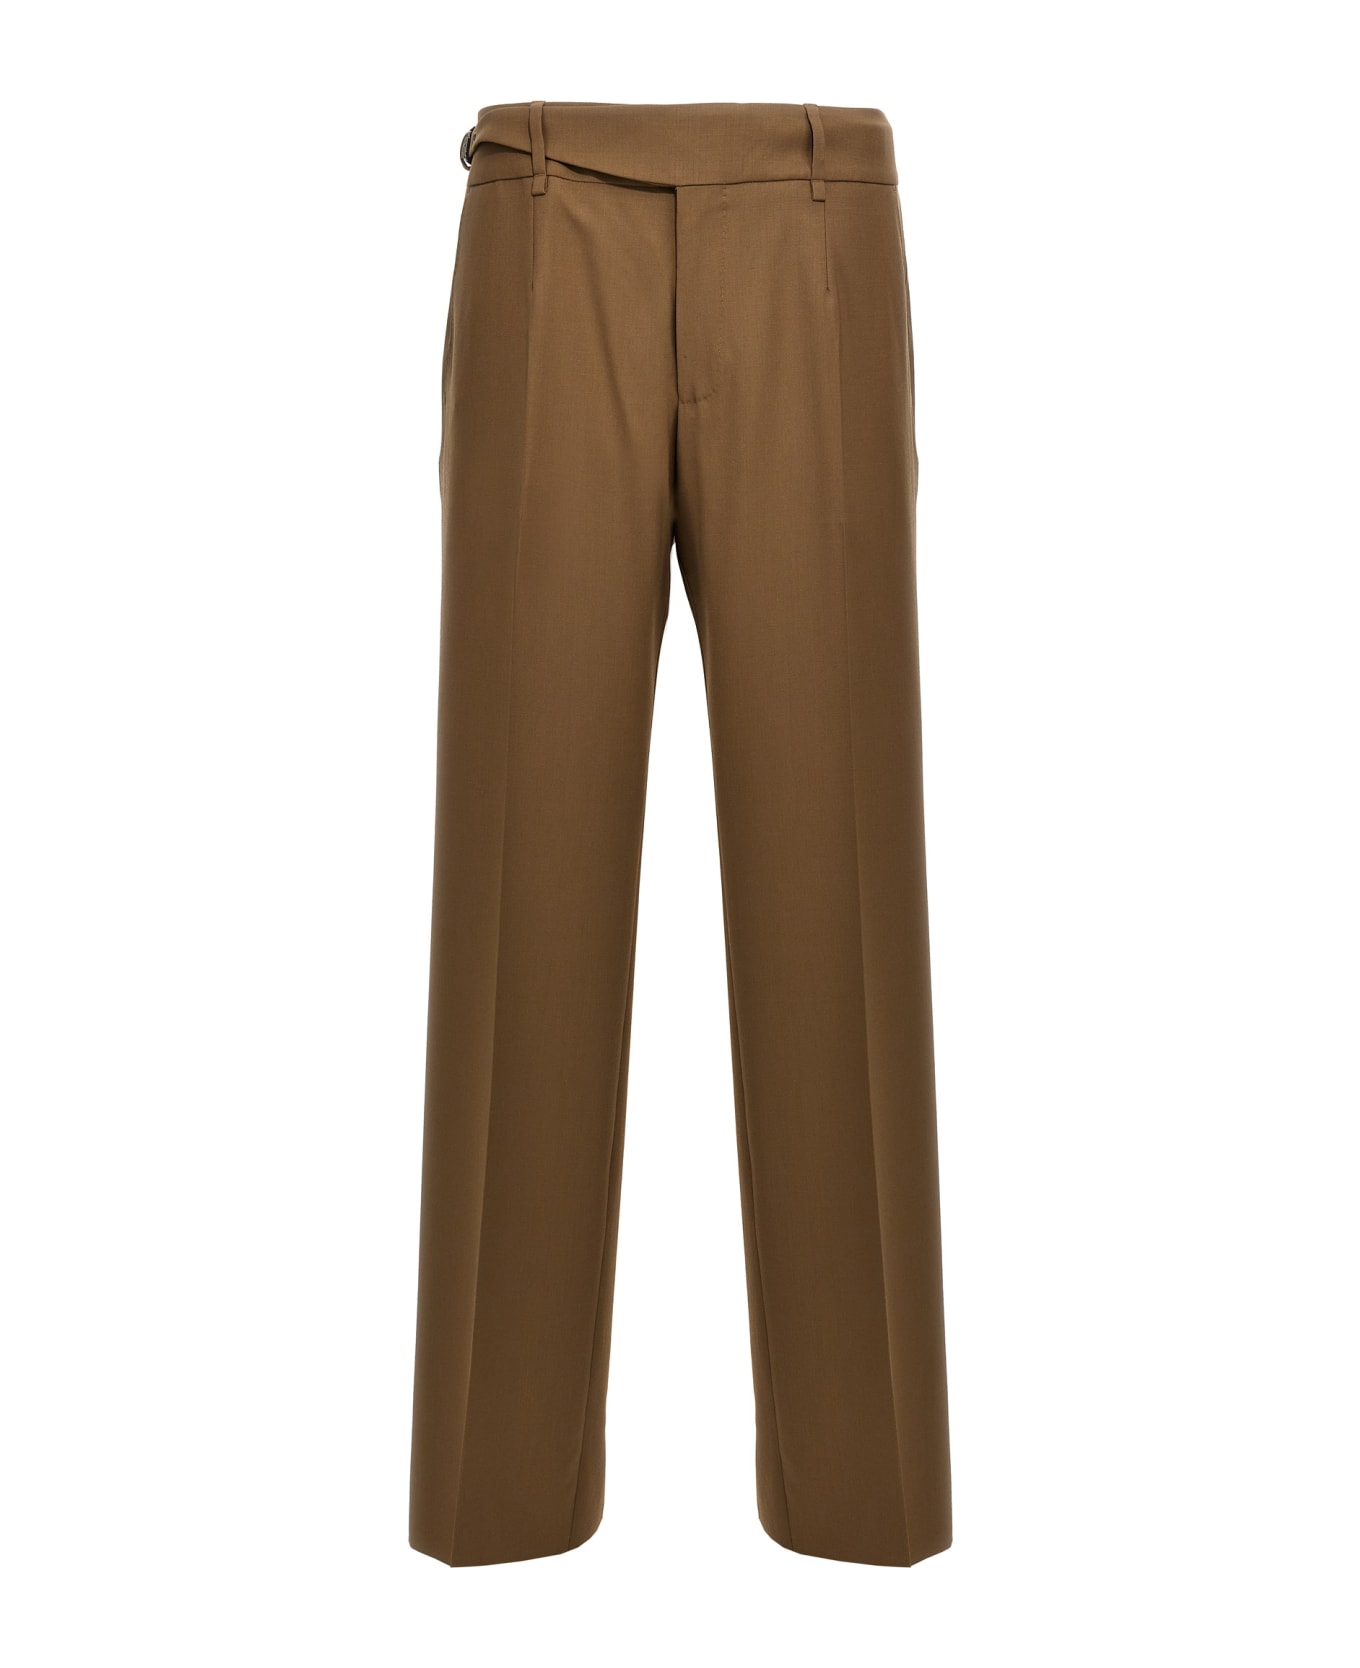 Dolce & Gabbana Tailored Trousers - Beige